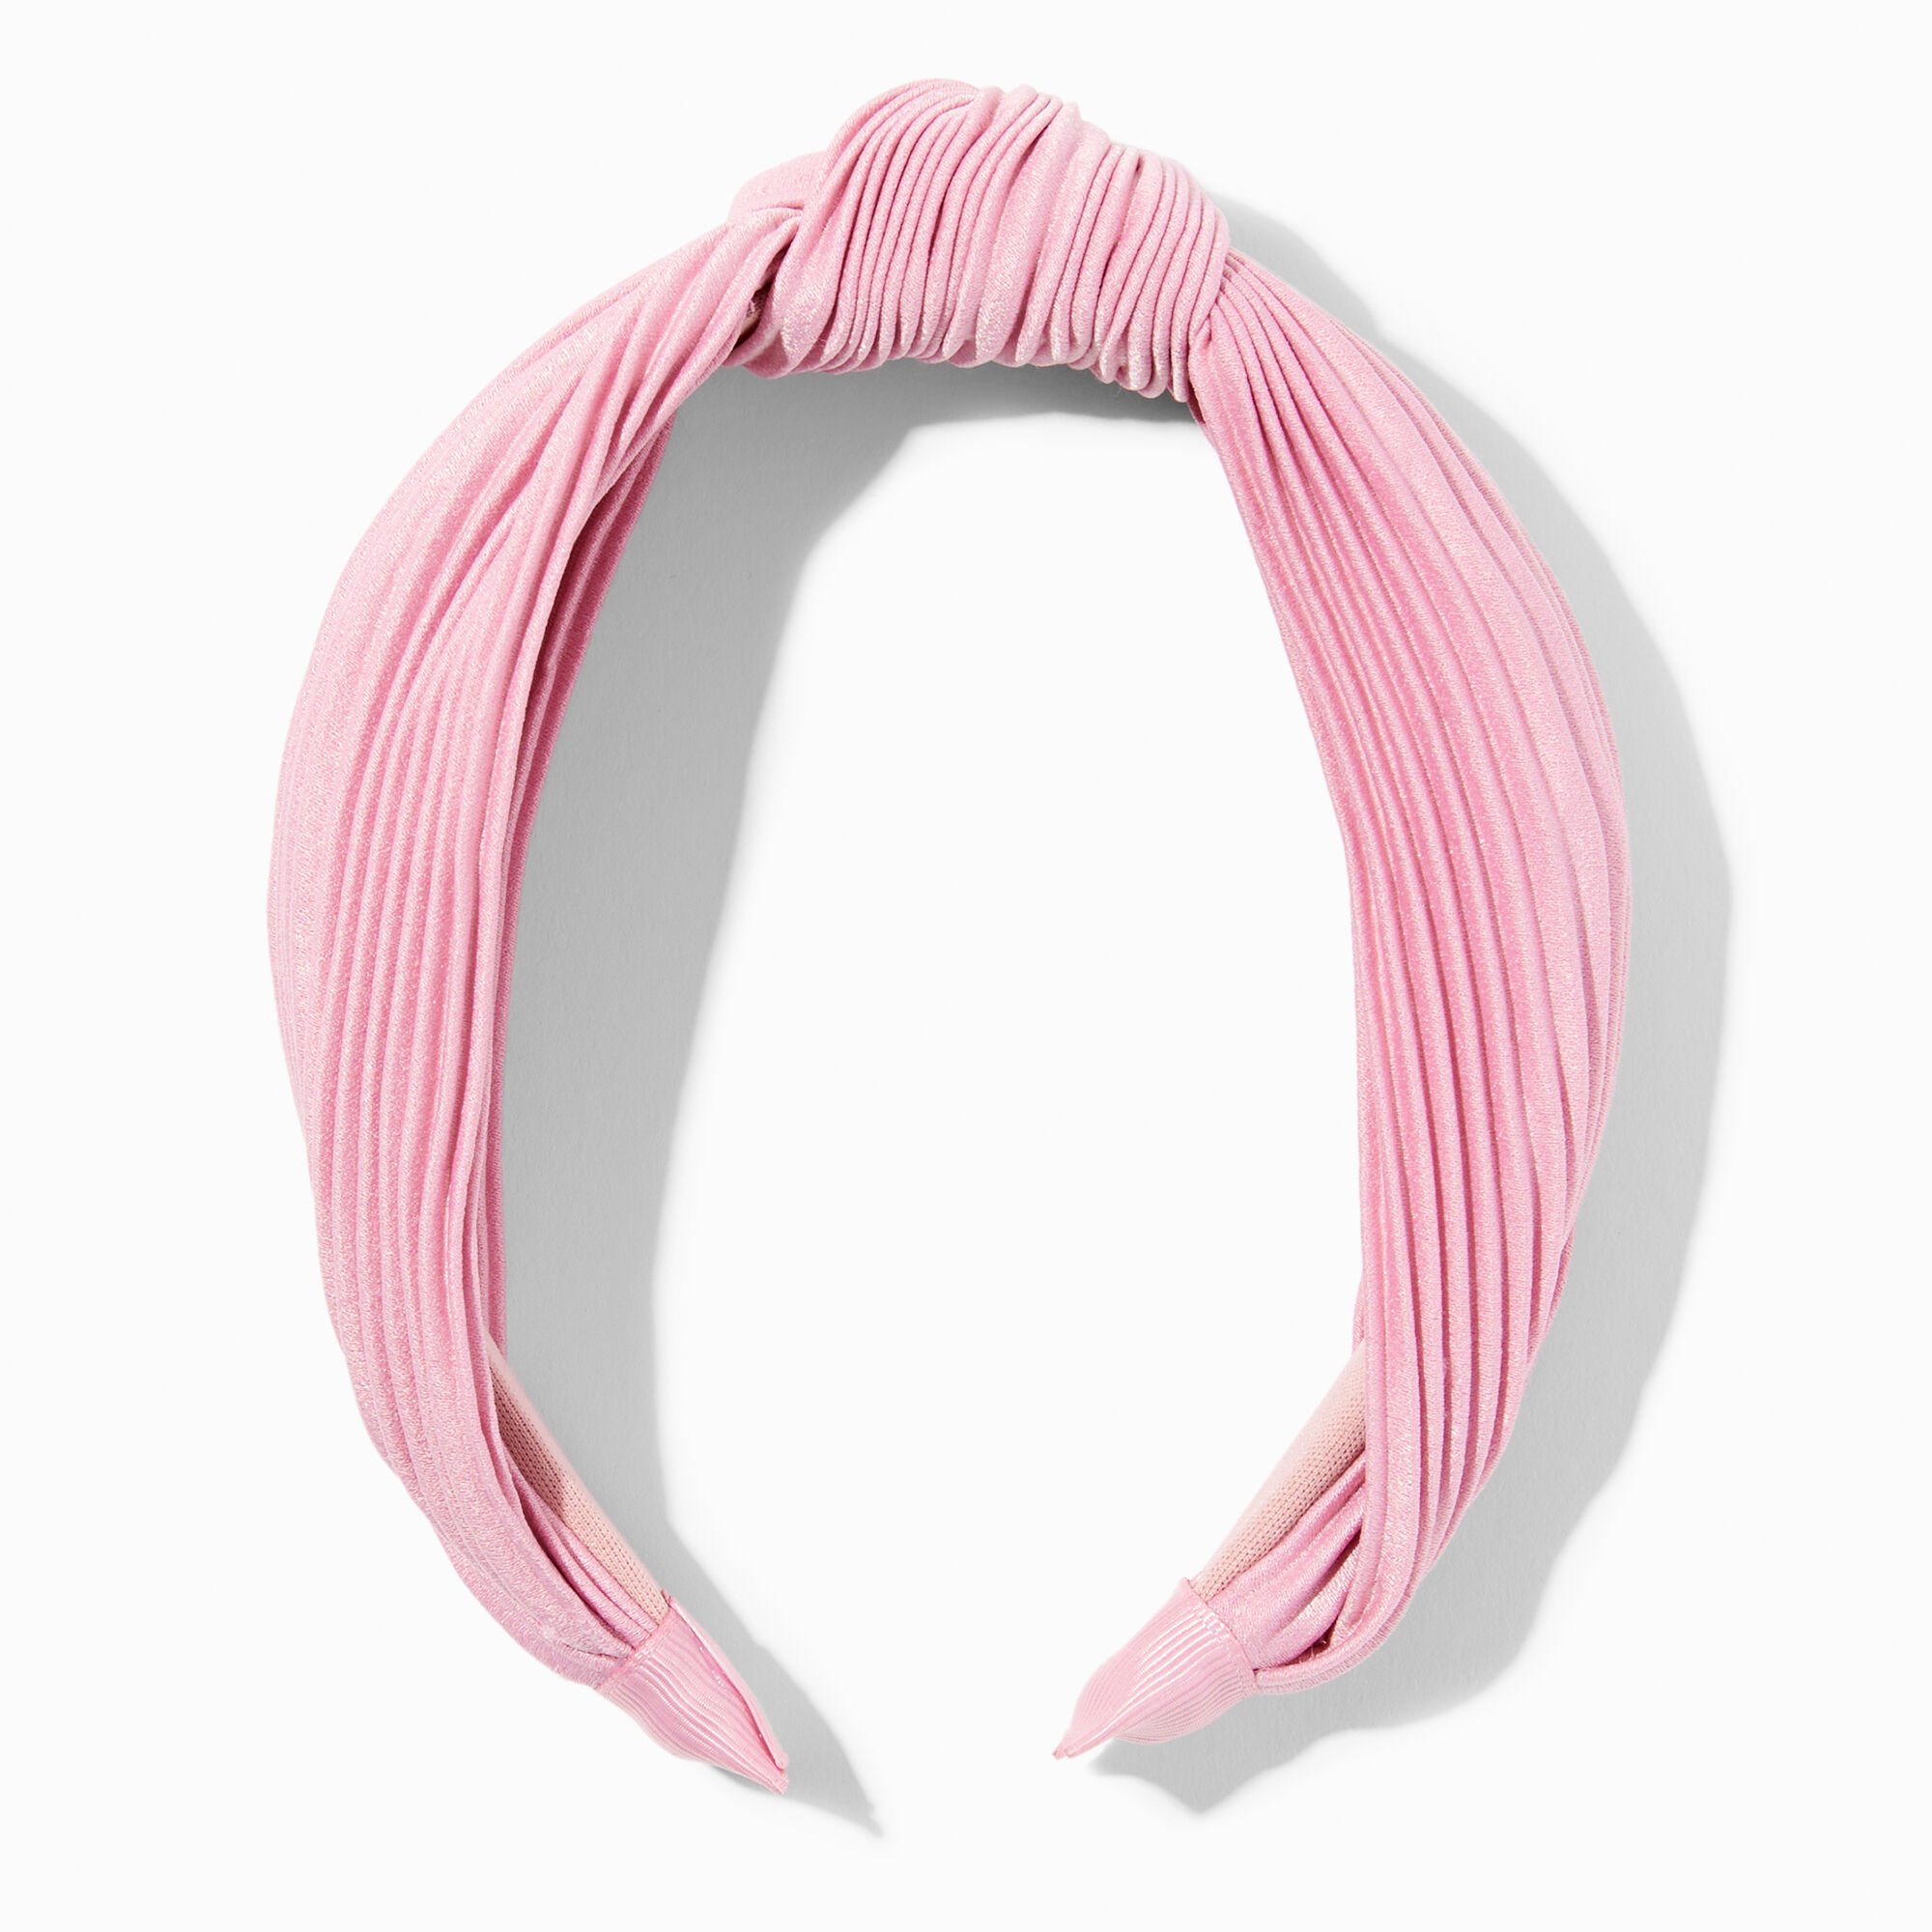 View Claires Blush Pleated Knotted Headband Pink information